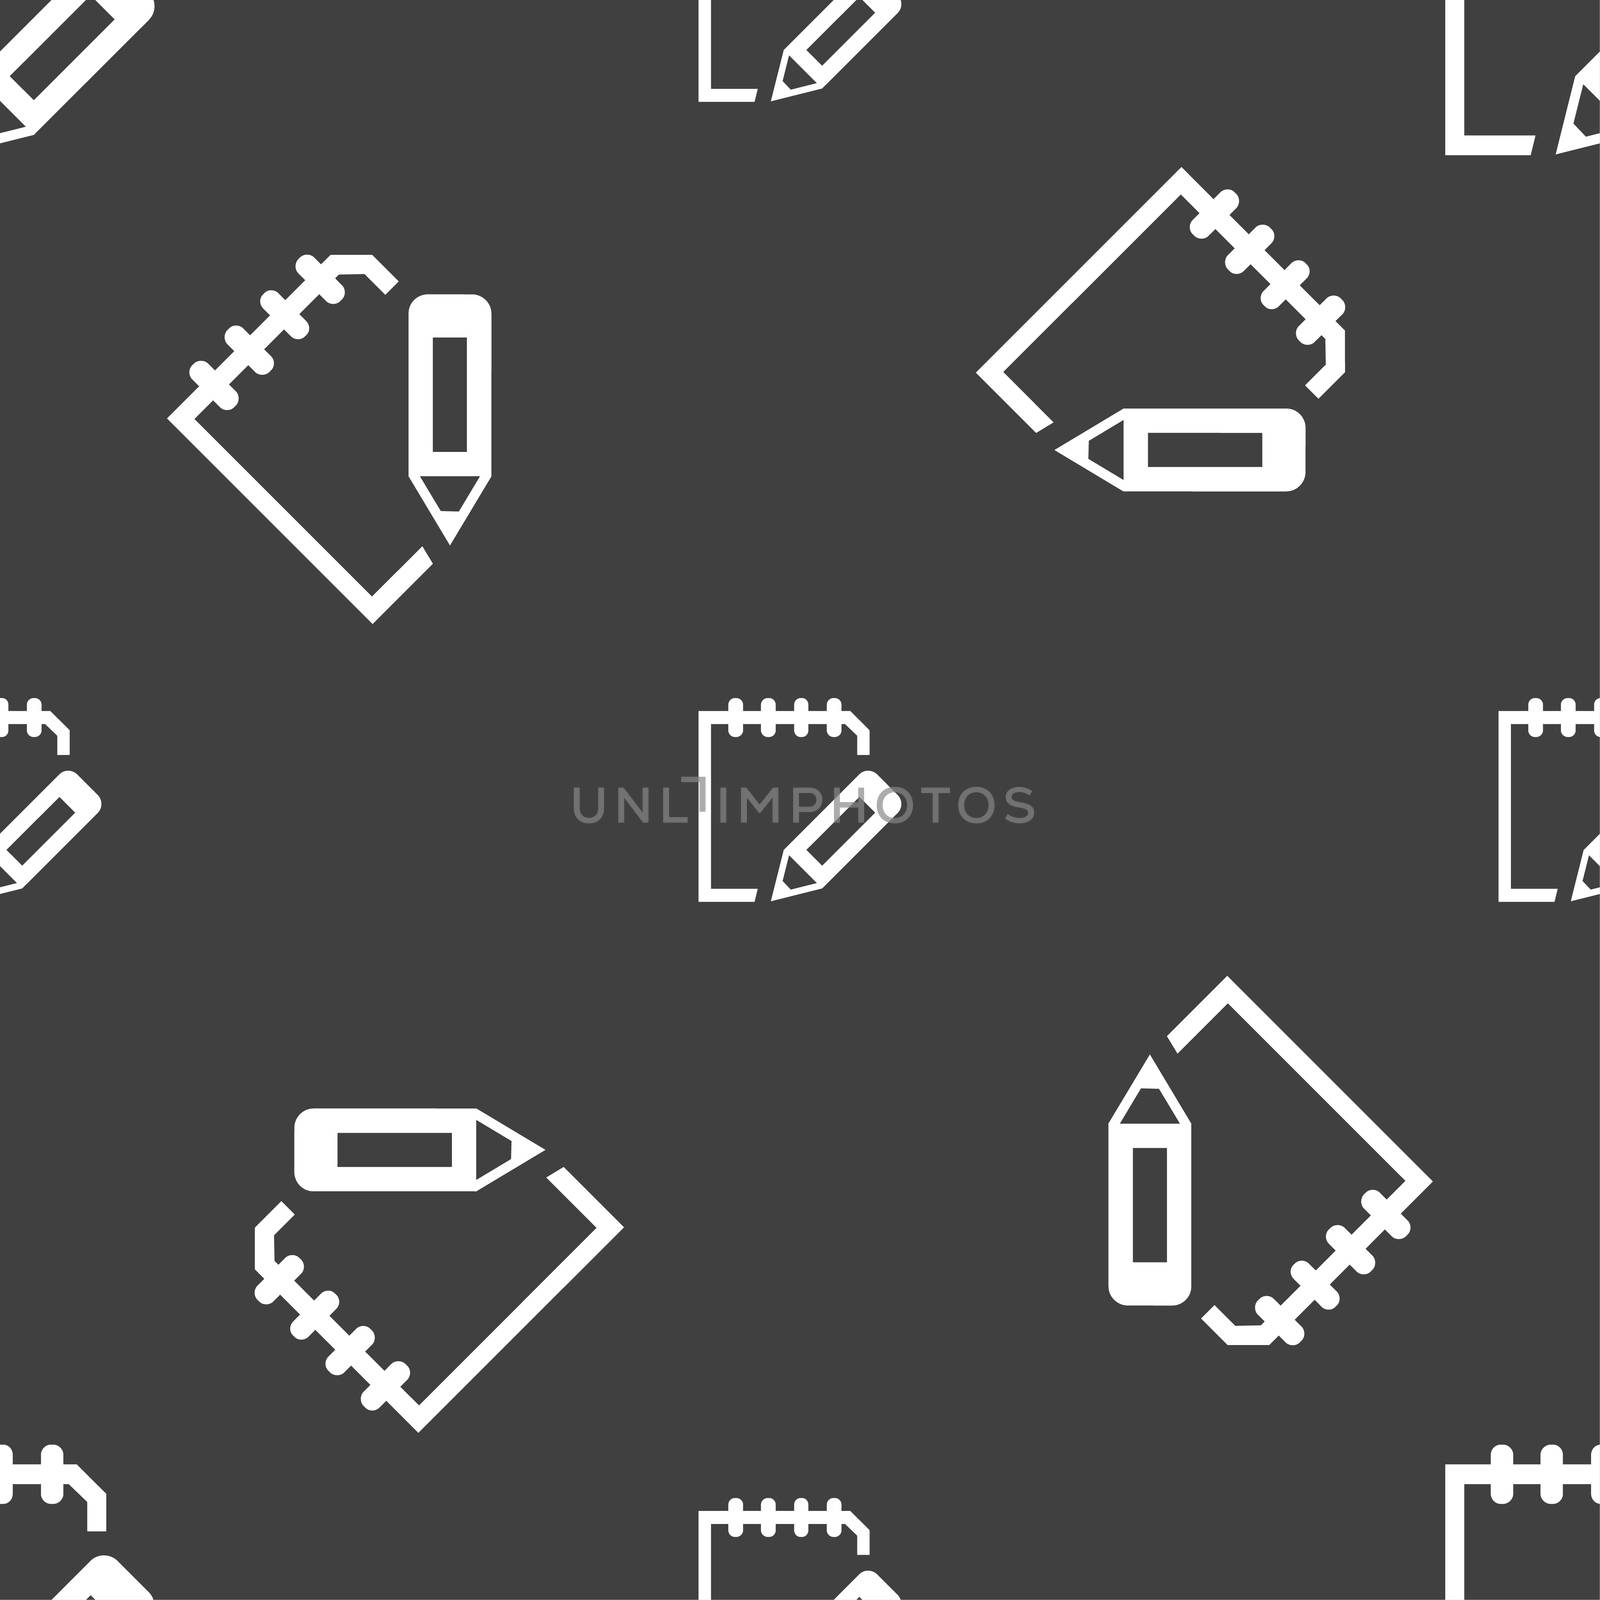 Edit document sign icon. Seamless pattern on a gray background. illustration